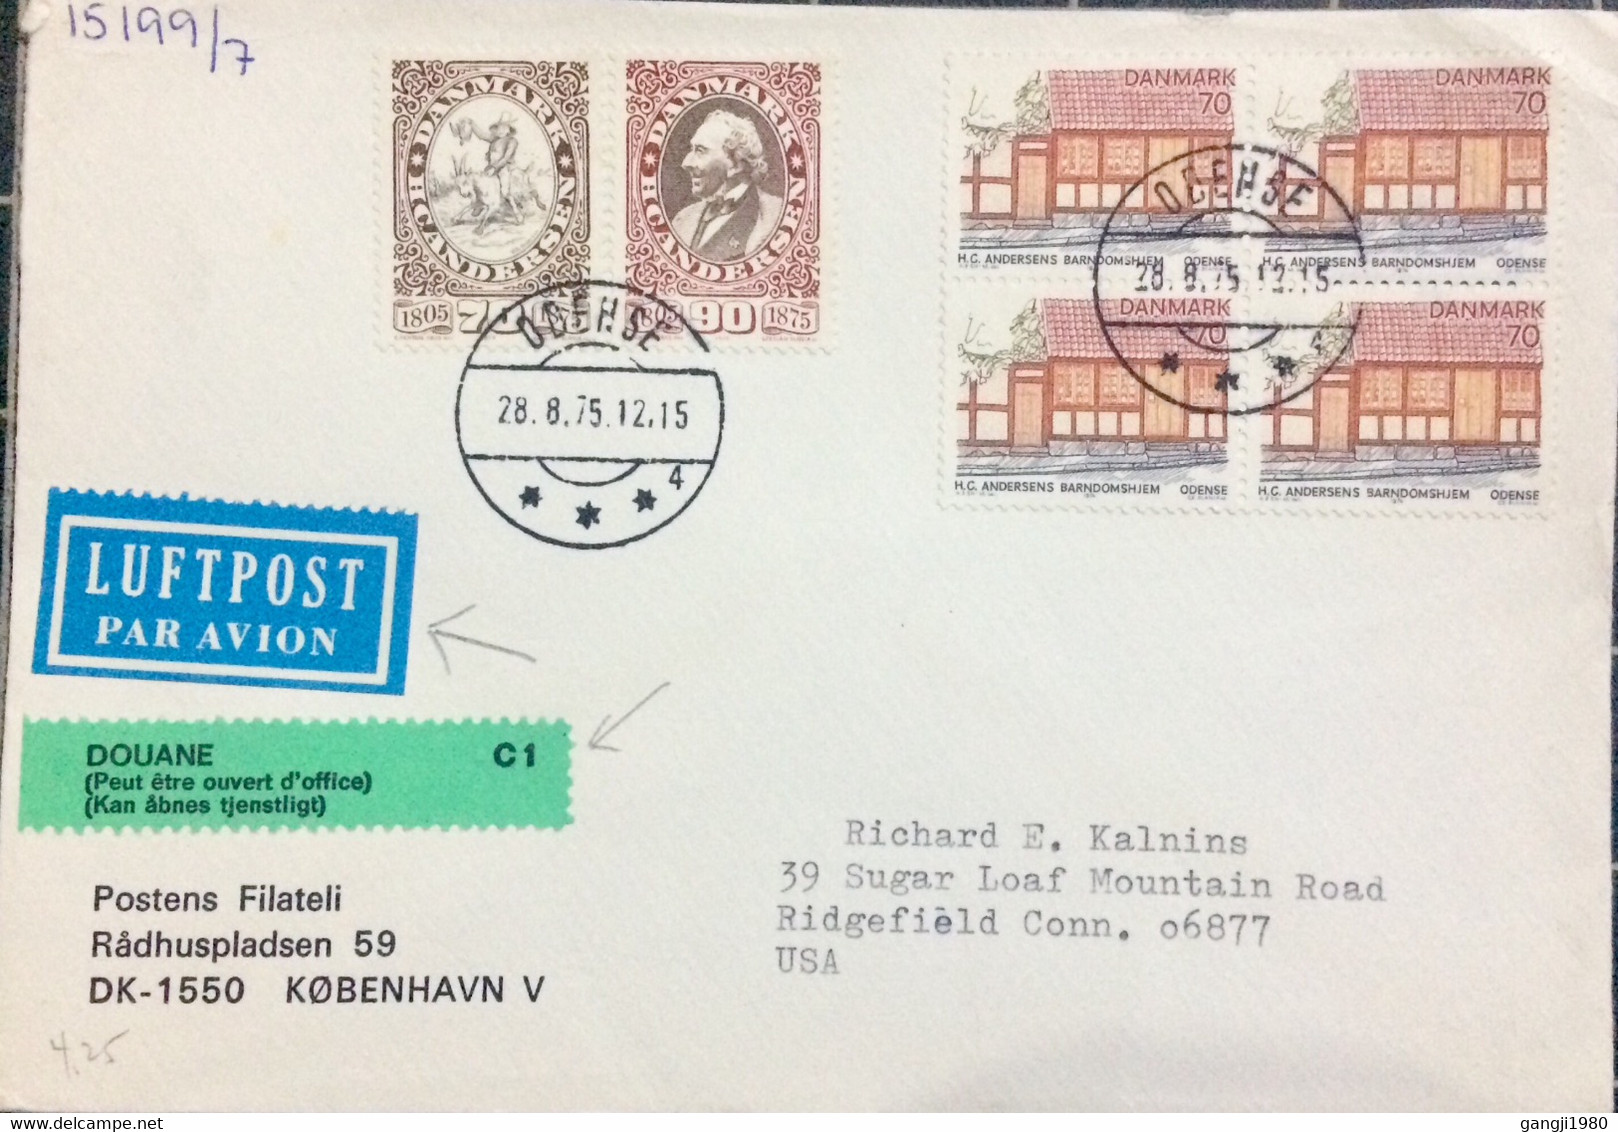 DENMARK 1975, COVER USED TO USA, NUMSKULL JACK, HANS ANDERSEN, ODENCE CITY CANCEL, AIRMAIL, DOUBLE & CUSTOMS LABEL - Lettres & Documents